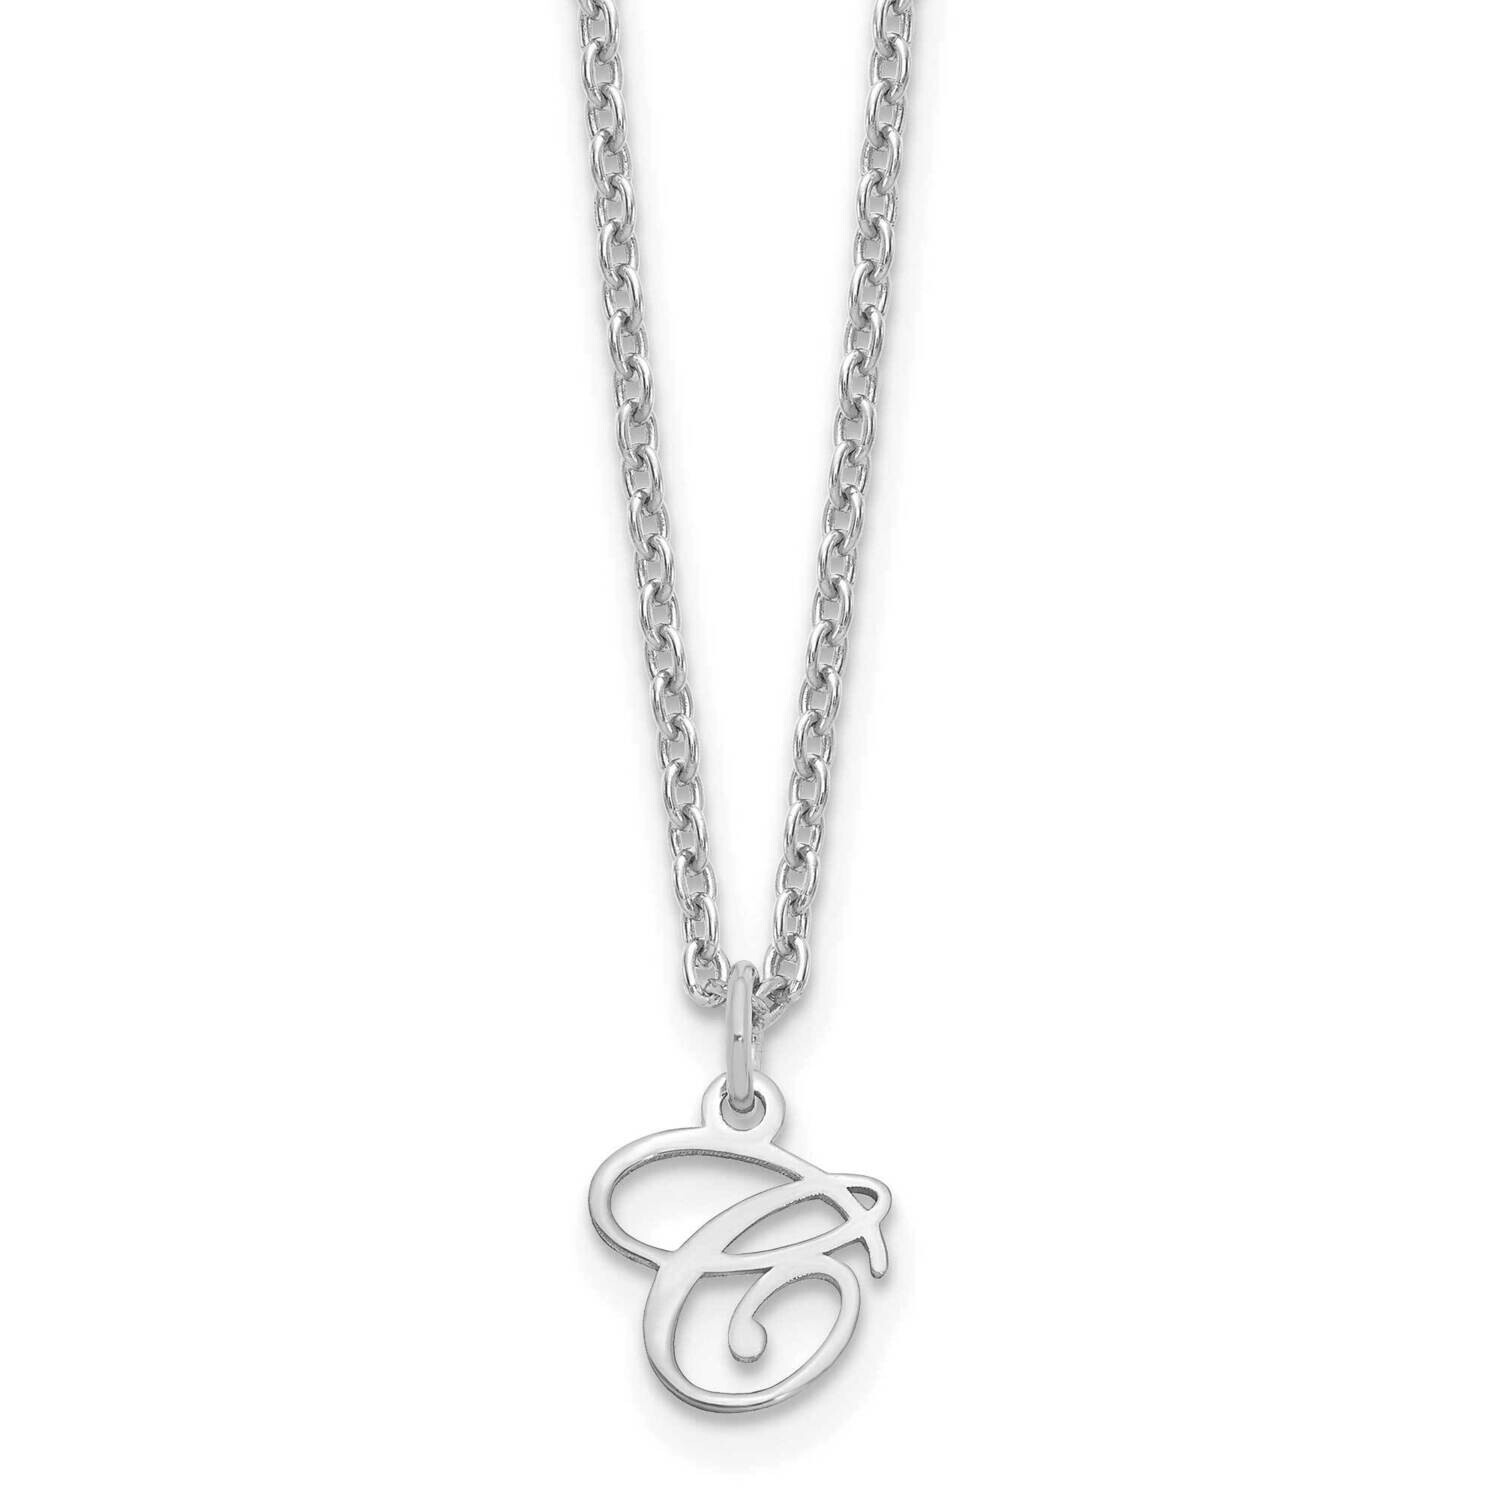 Letter C Initial Necklace Sterling Silver Rhodium-Plated XNA756SS/C